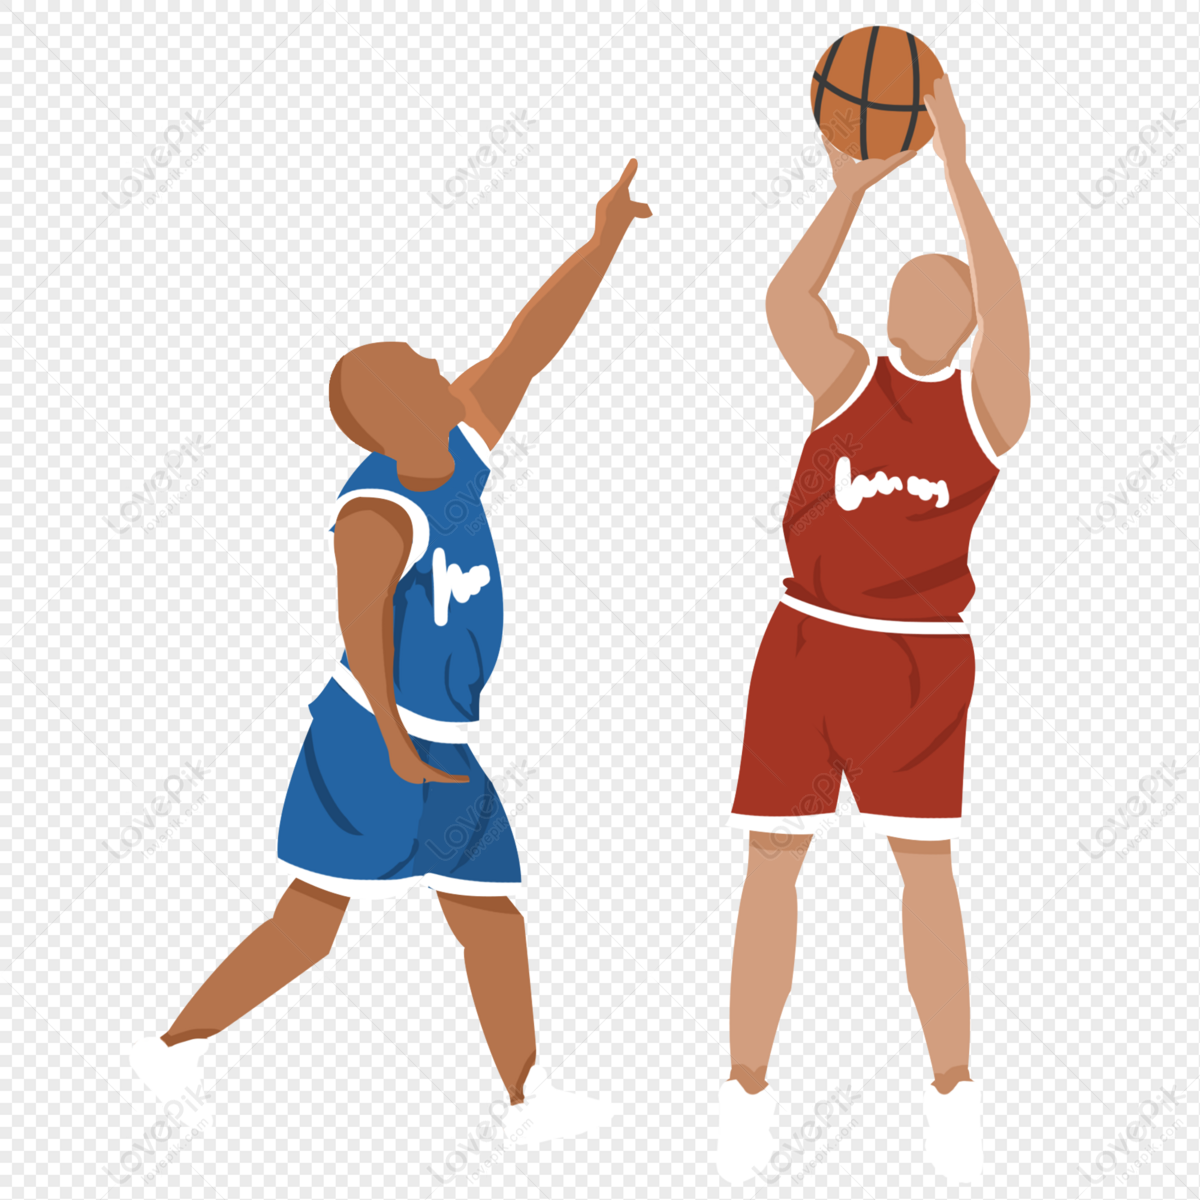 Nba Basketball Team PNG Transparent Image And Clipart Image For Free  Download - Lovepik | 401338367